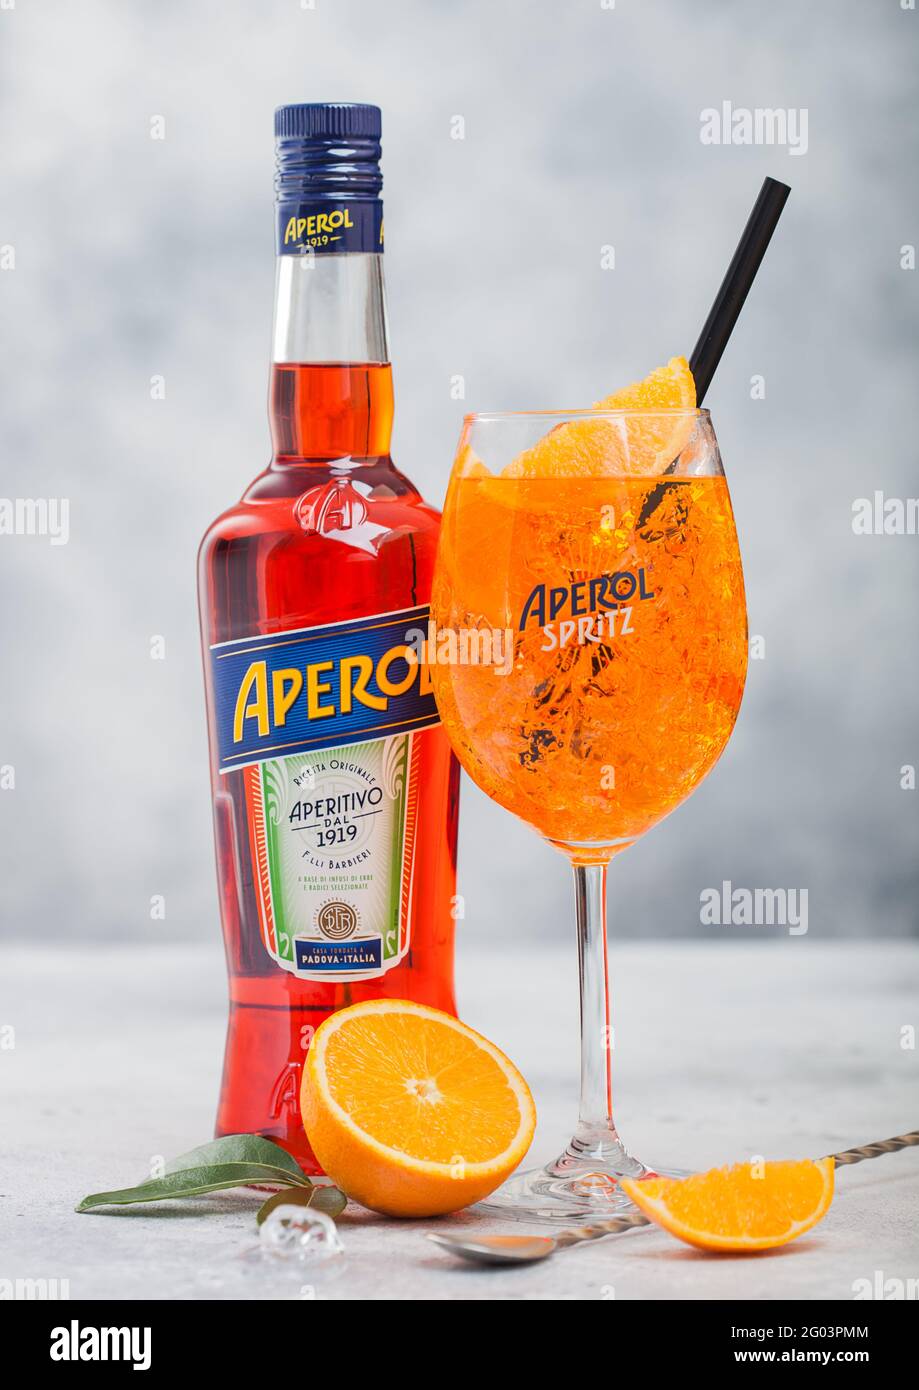 LONDON, UK - MAY 20, 2020: Bottle of Aperol Aperitivo summer cocktail drink  with original glass with spritz cocktail and oranges with bar spoon on lig  Stock Photo - Alamy